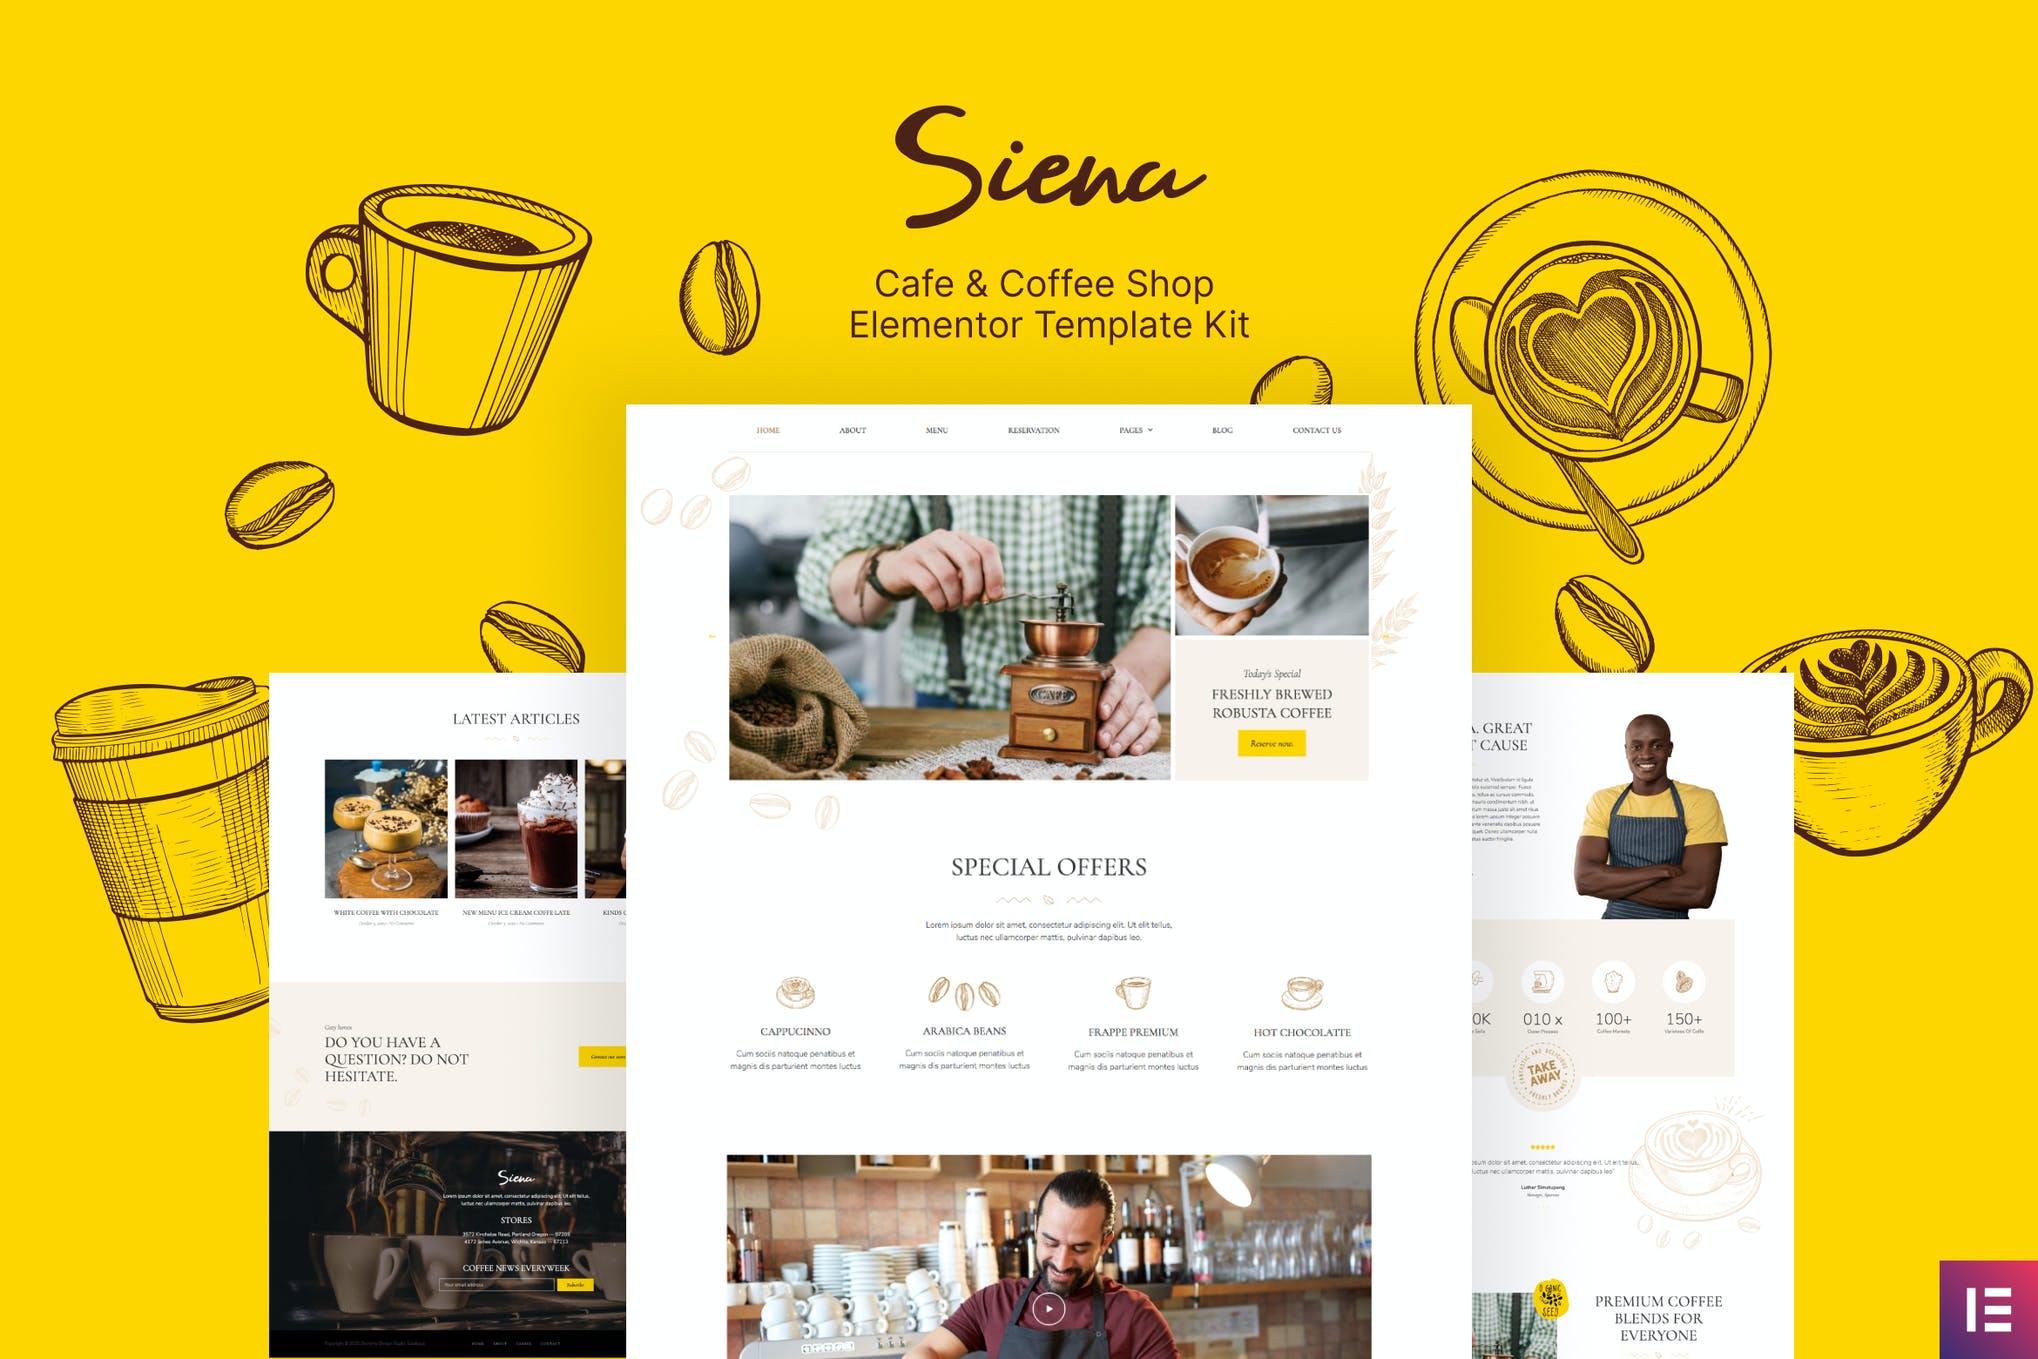 Siena - Cafe and Coffee Shop Template Kit